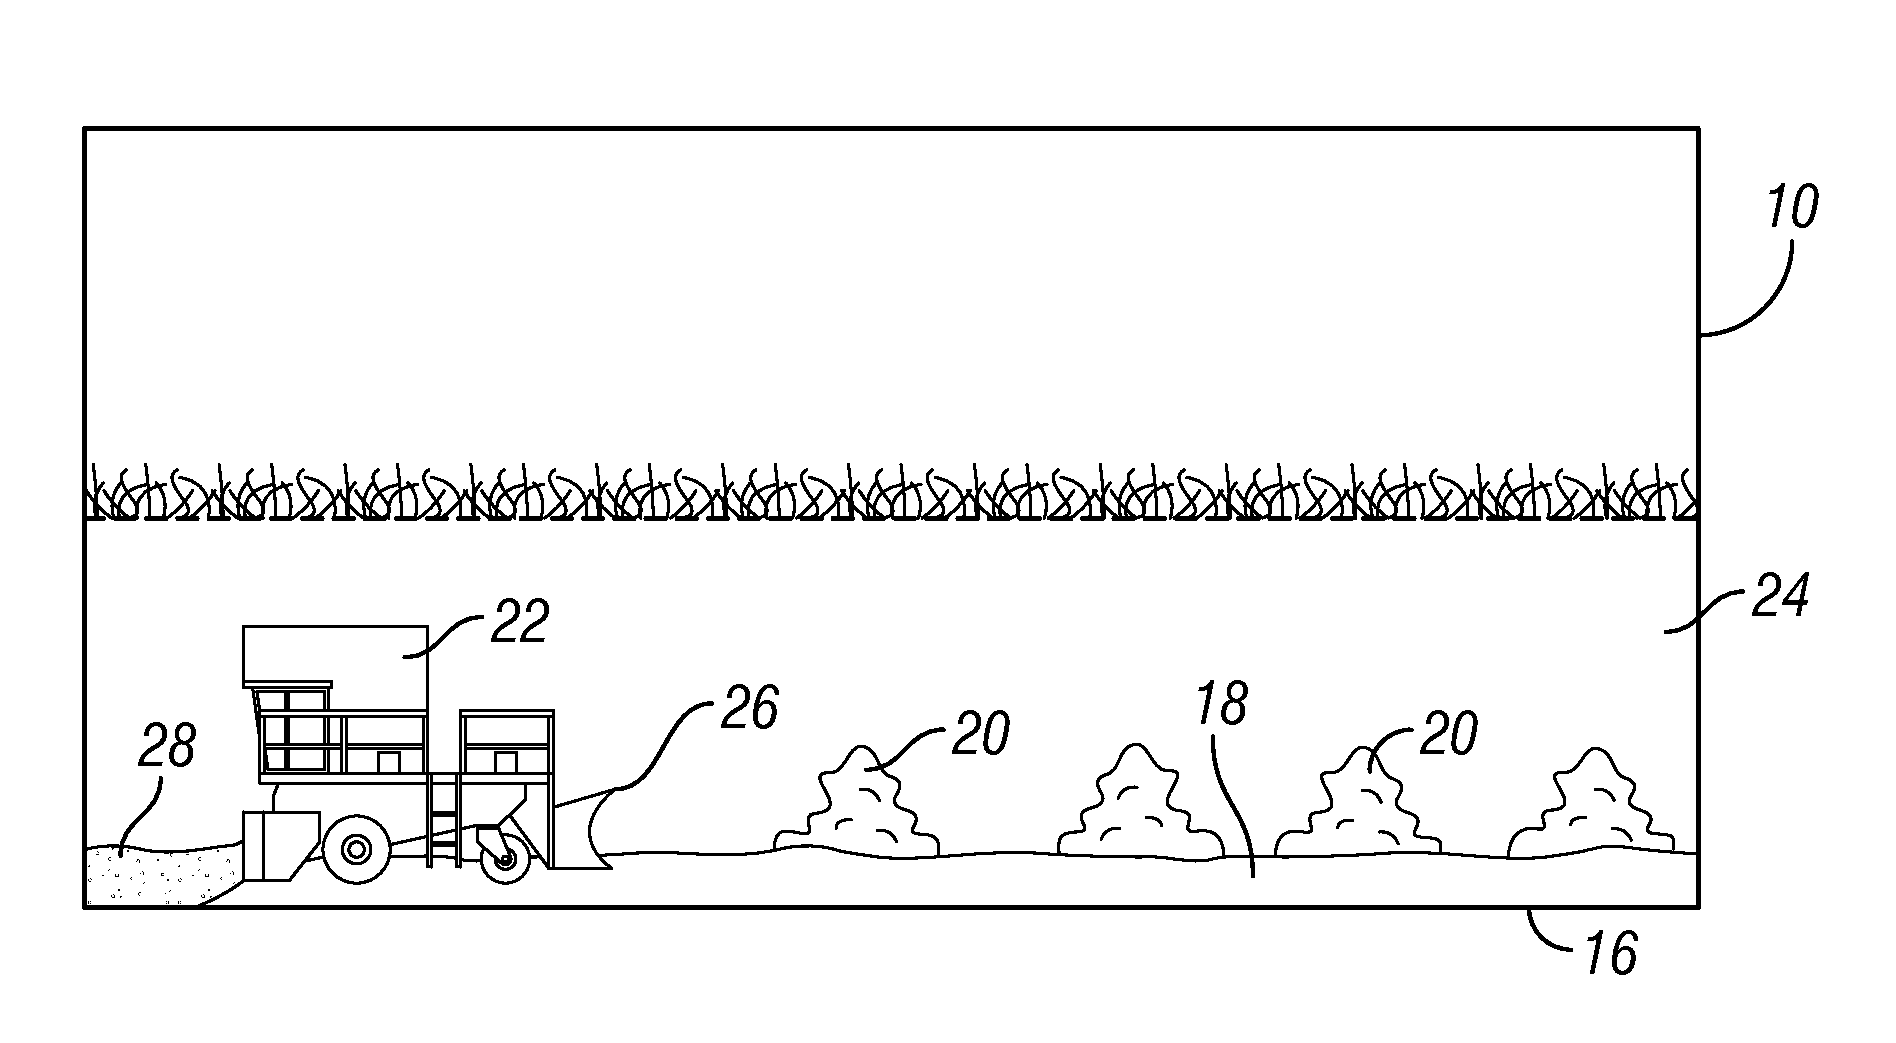 Methods of Treating Waste from a Chicken House using Short Paper Fibers